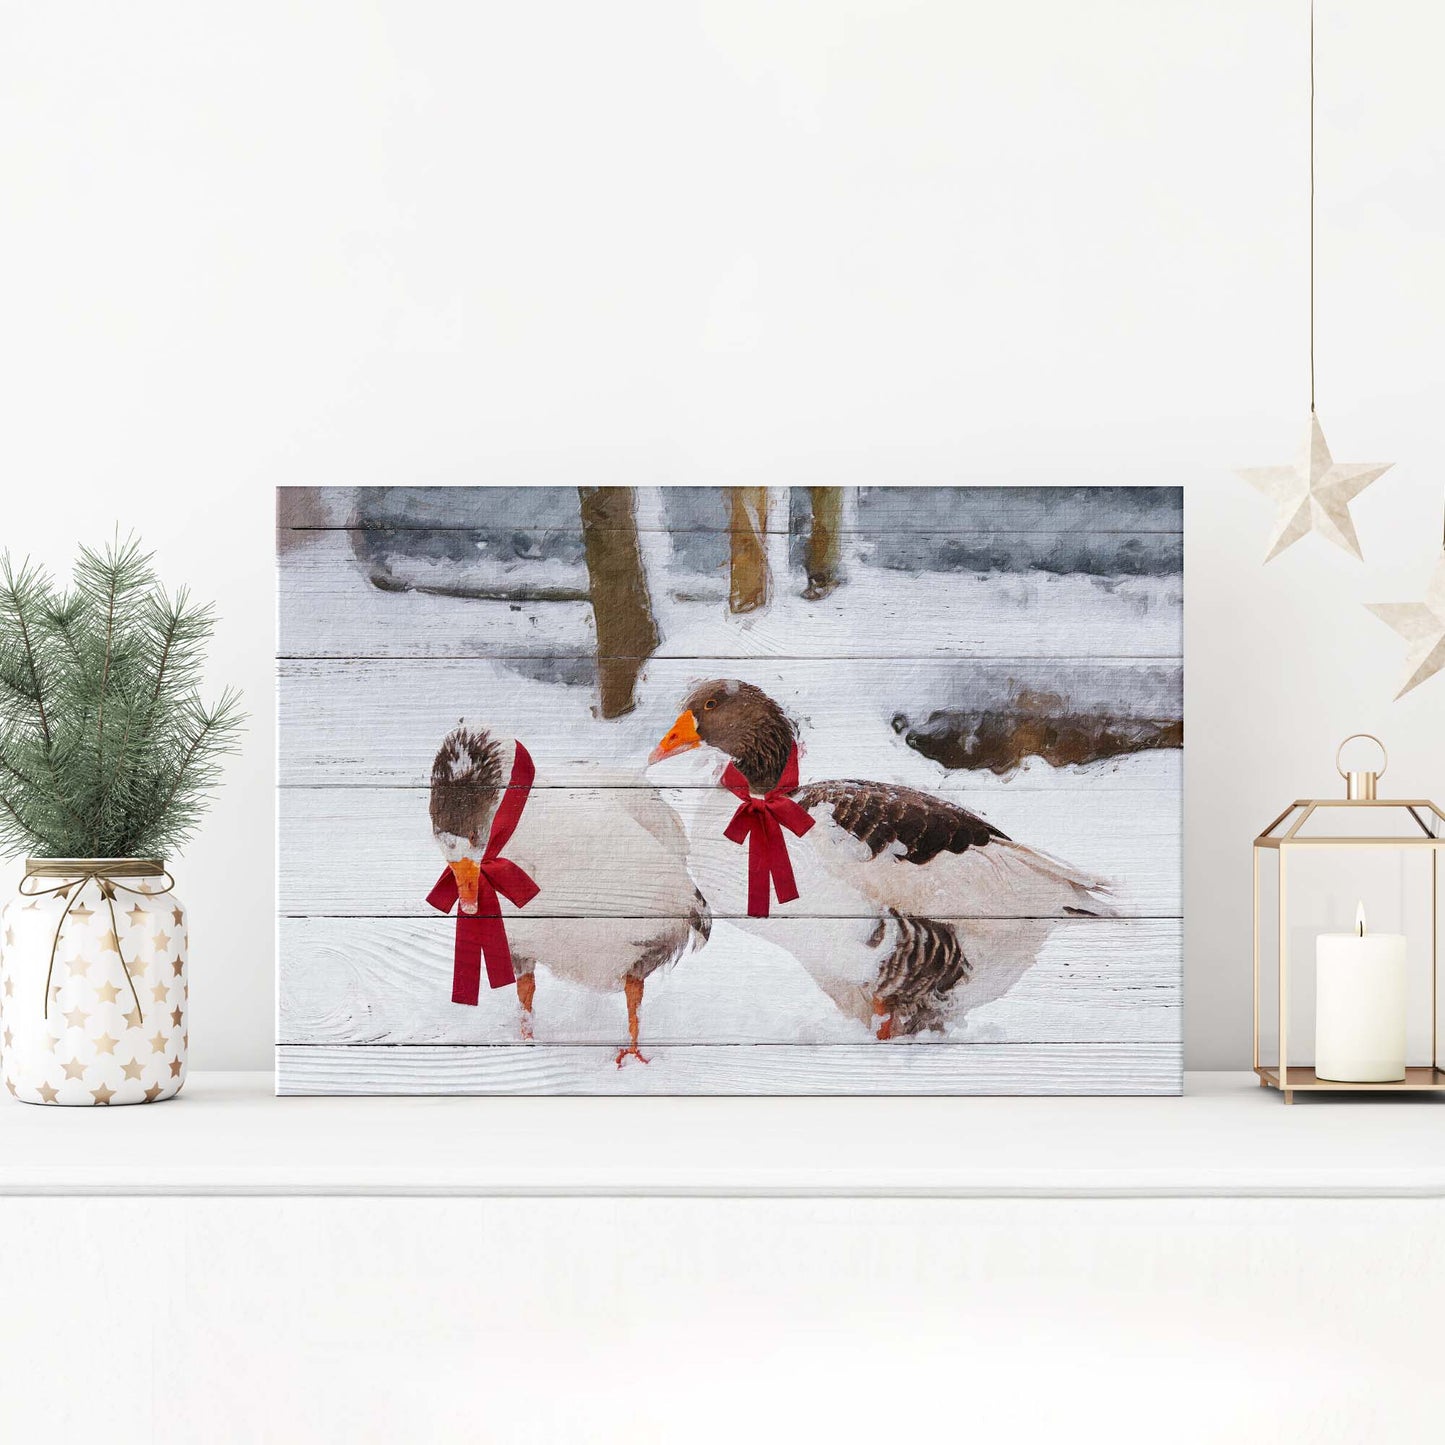 Christmas Geese Canvas Wall Art - Image by Tailored Canvases